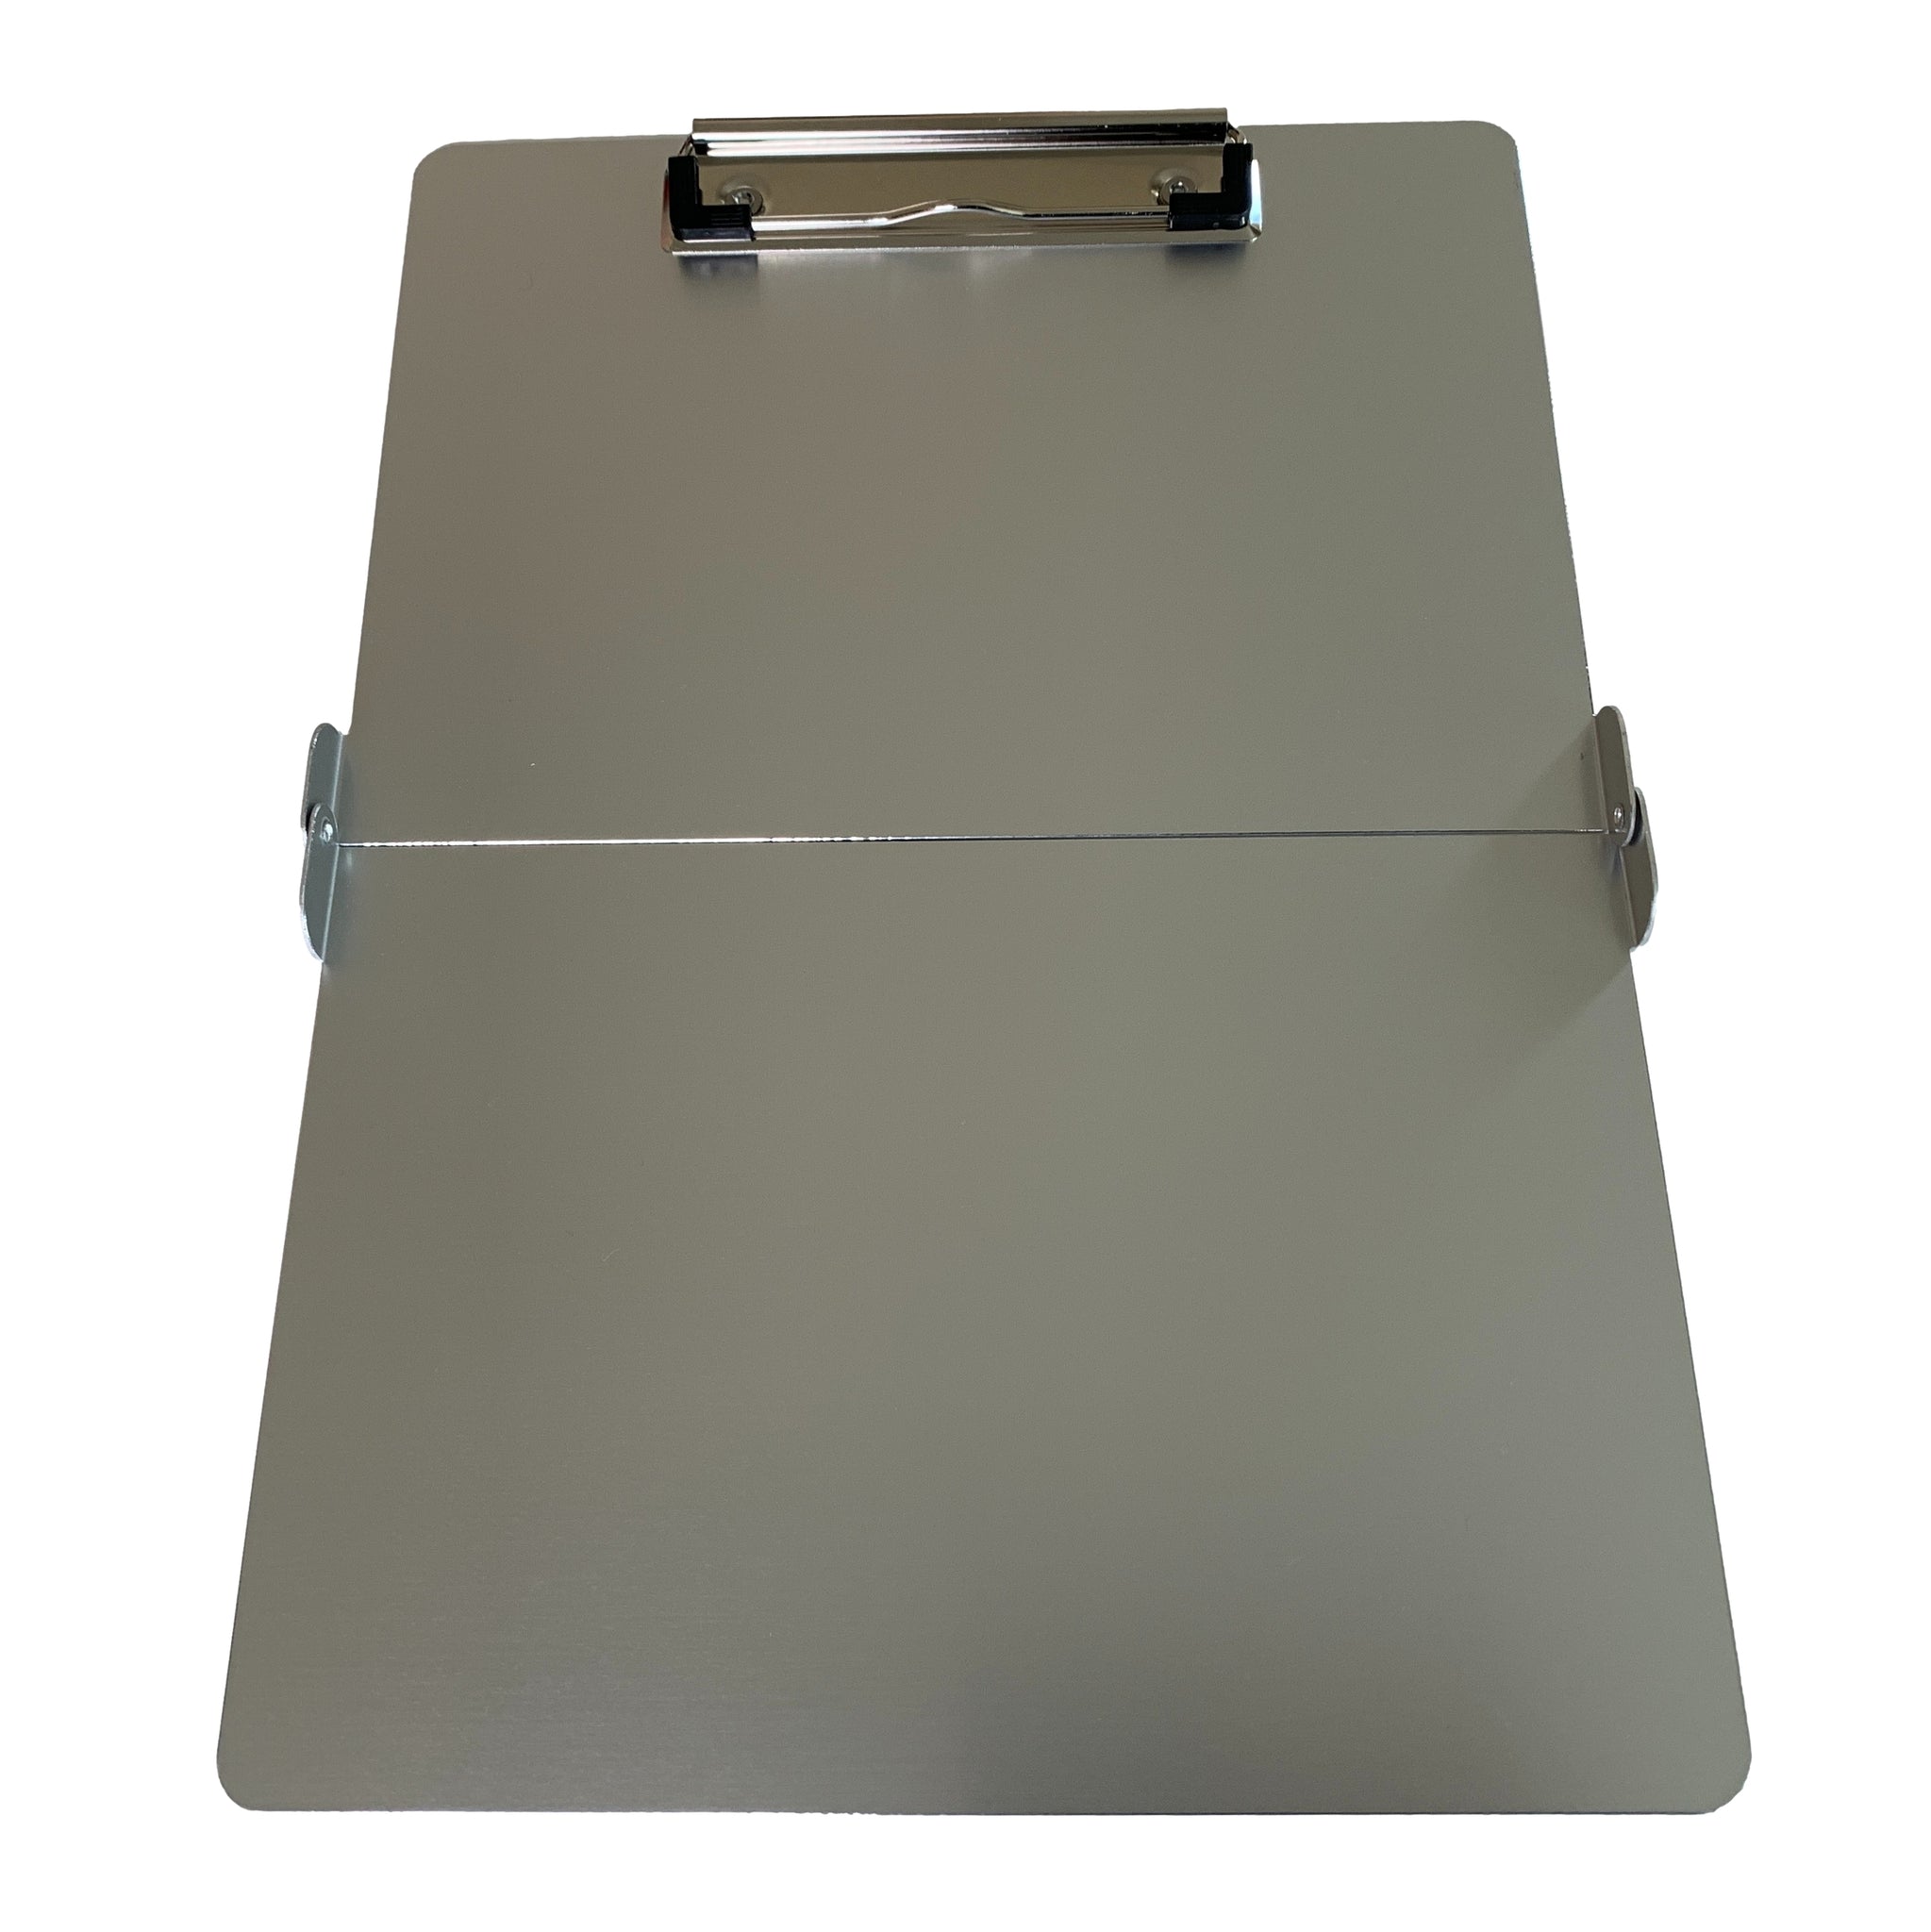 A4 Aluminum Foldable Clipboard by Janrax